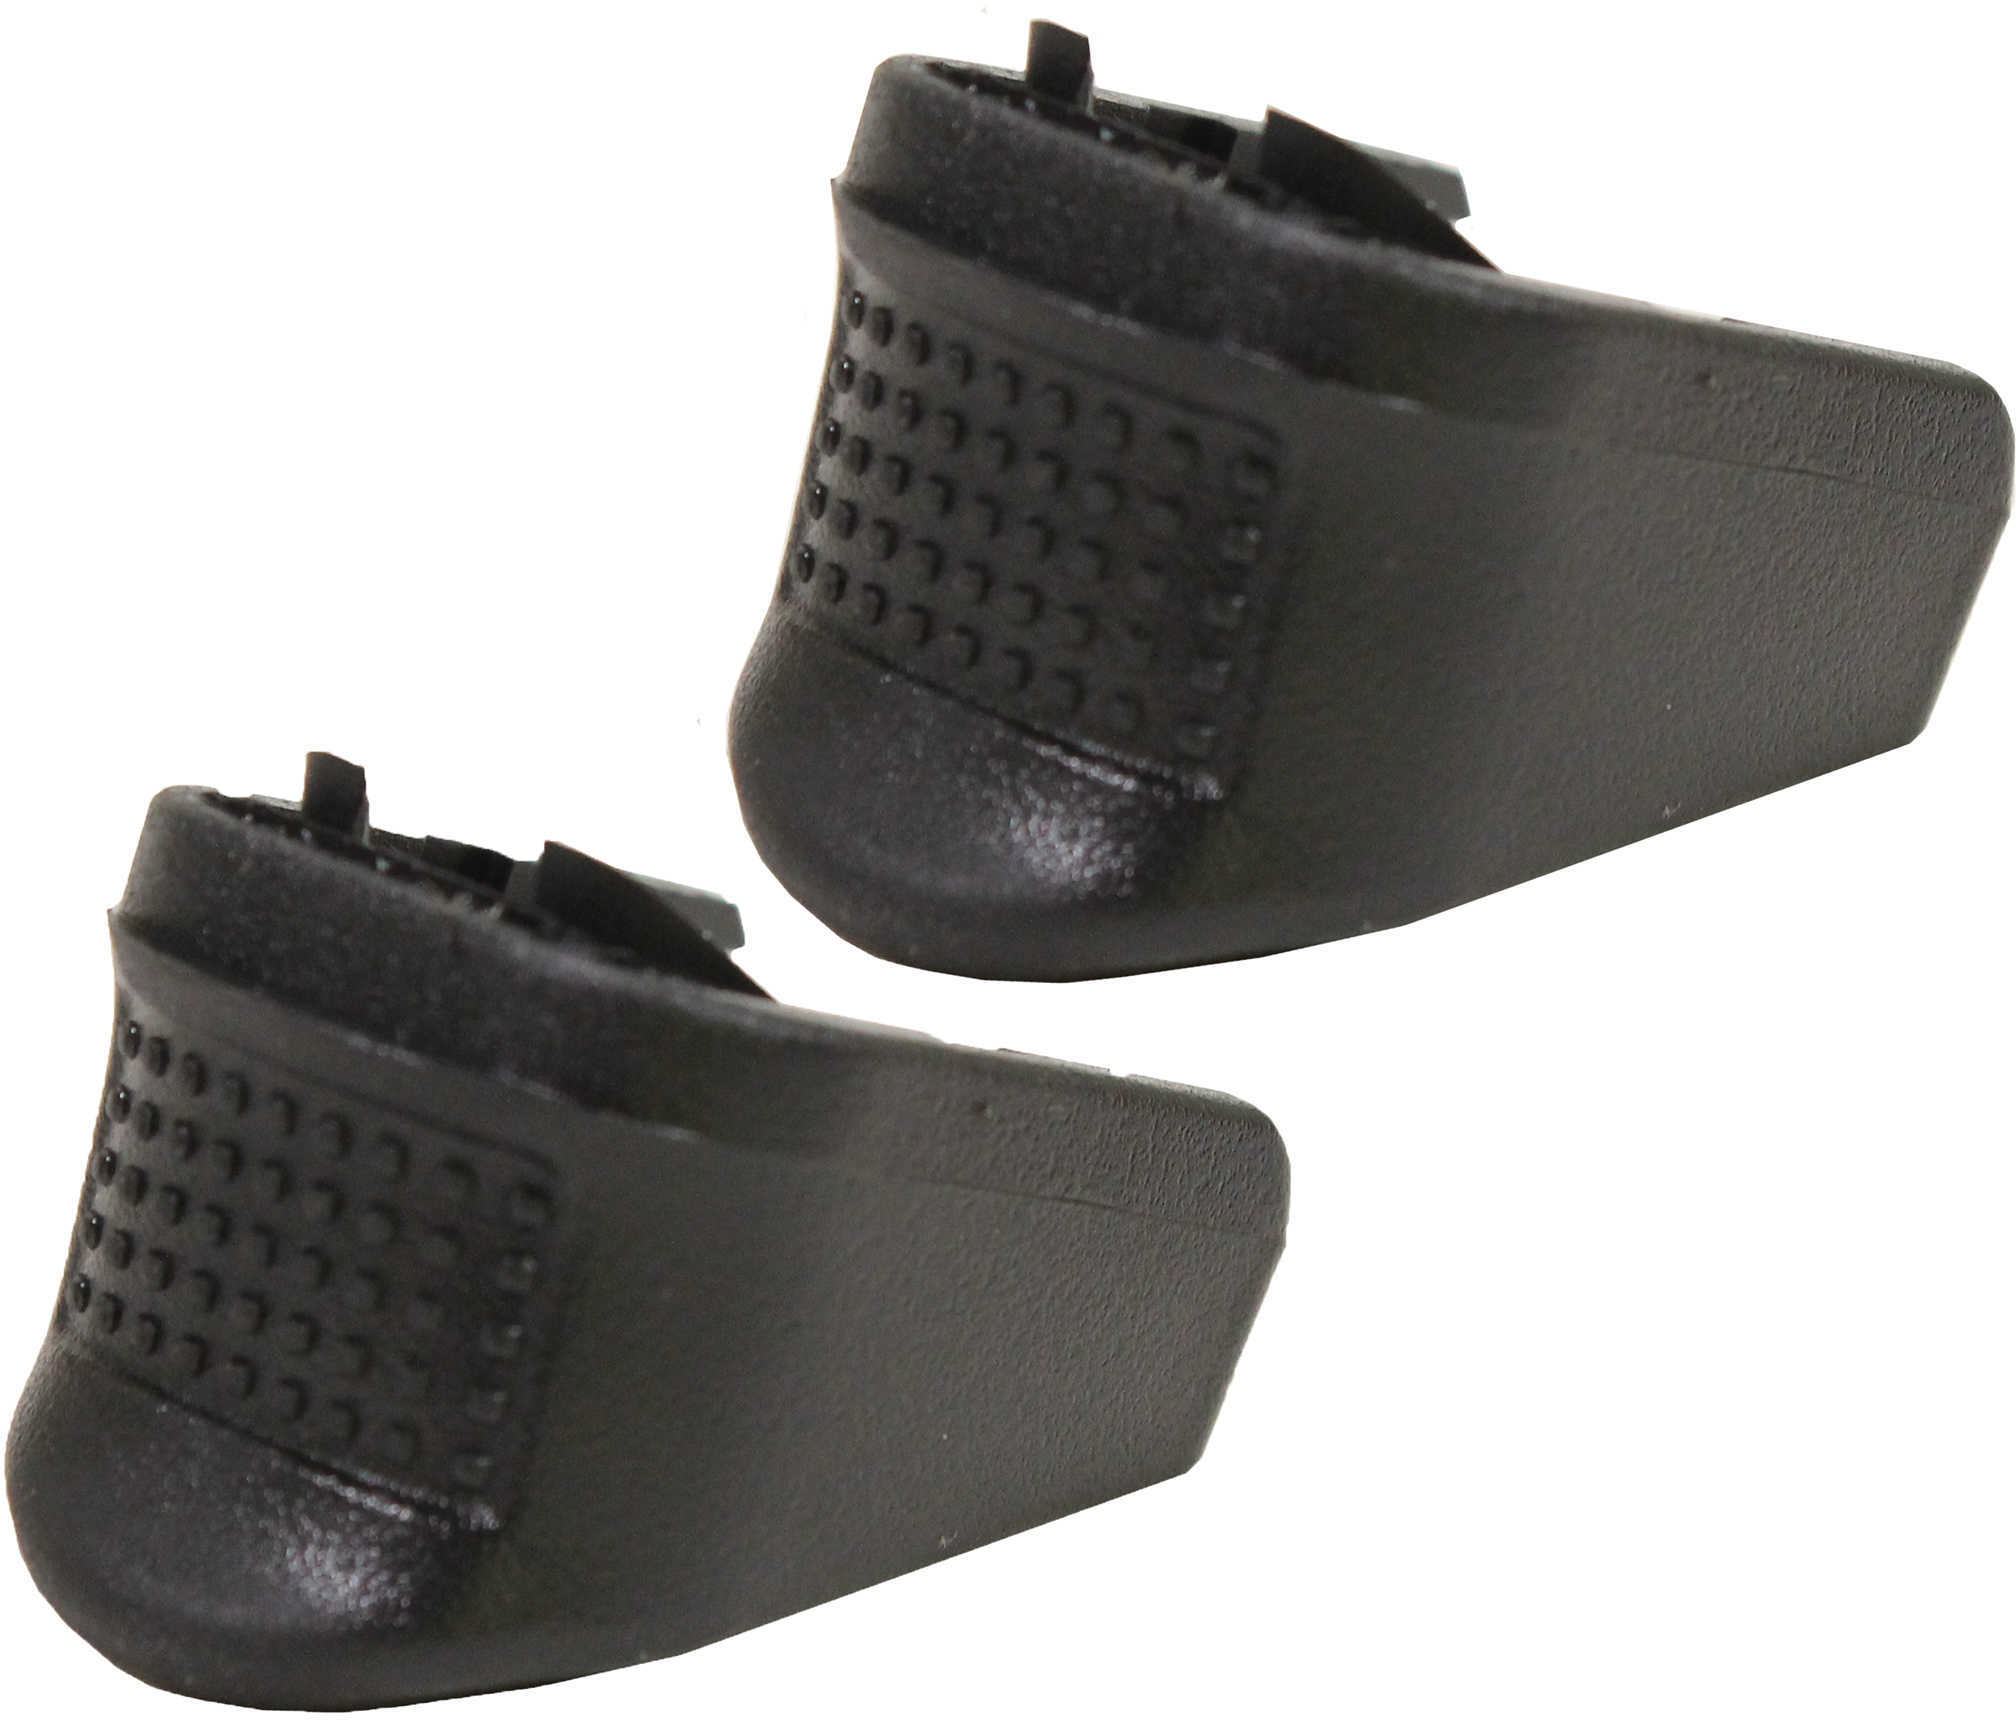 Pachmayr Grip Extender For XL Plus Capacity for Glock 26/27/33/39 +3 ROUNDS Model 03880